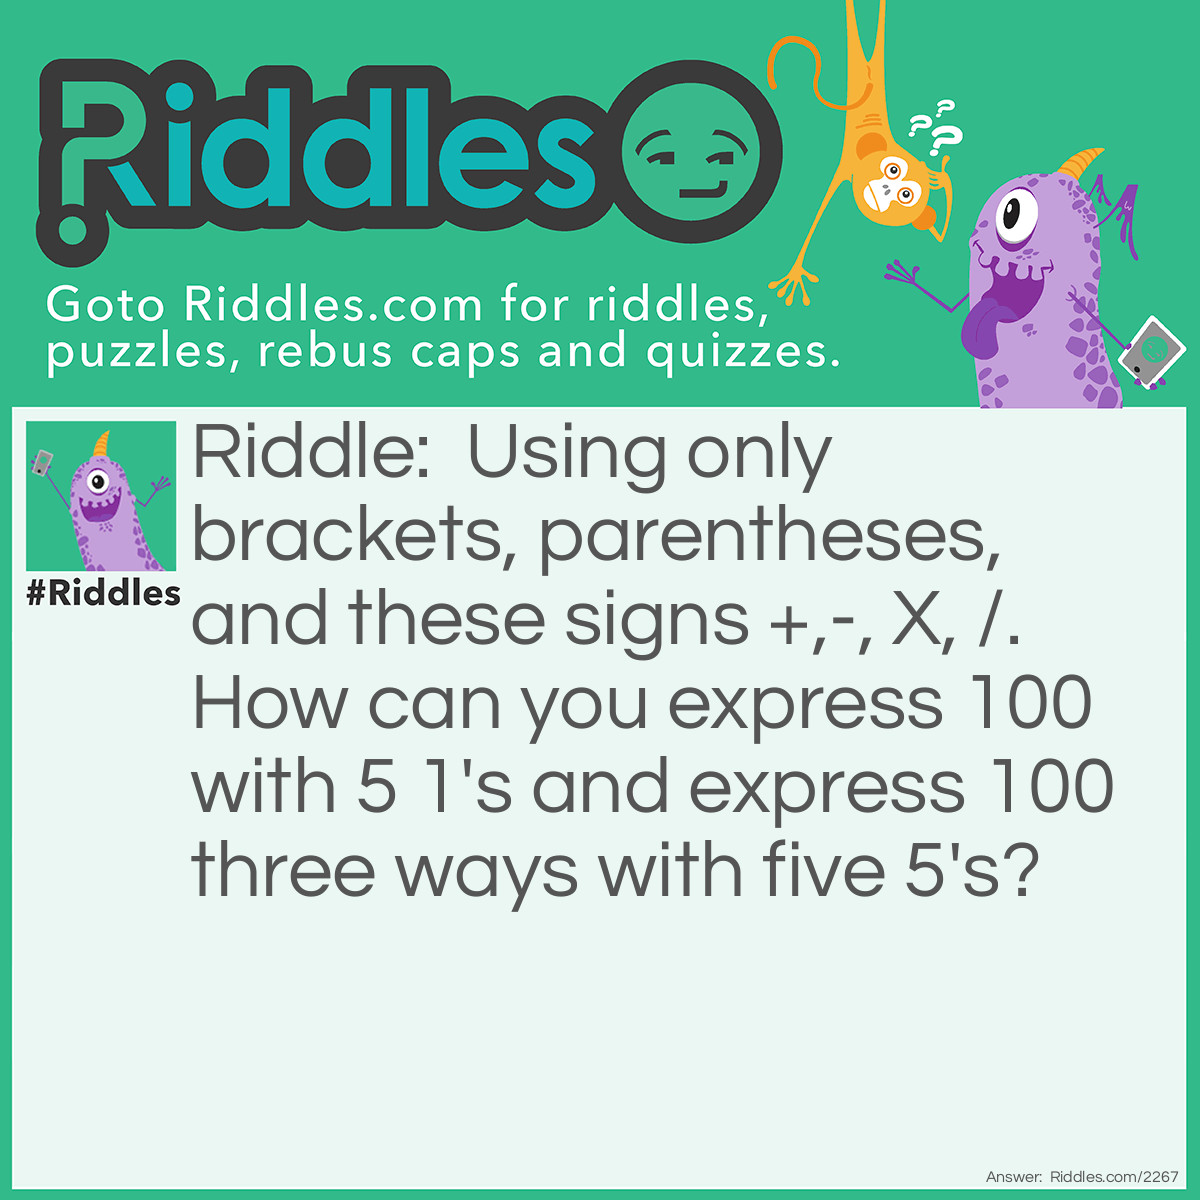 Riddle: Using only brackets, parentheses, and these signs +,-, X, /. How can you express 100 with 5 1's and express 100 three ways with five 5's? Answer: 111-11=100
(5 x 5 x 5)-(5 x 5)=100; (5+5+5+5)x 5=100;(5 x 5)(5-(5/5)=100.